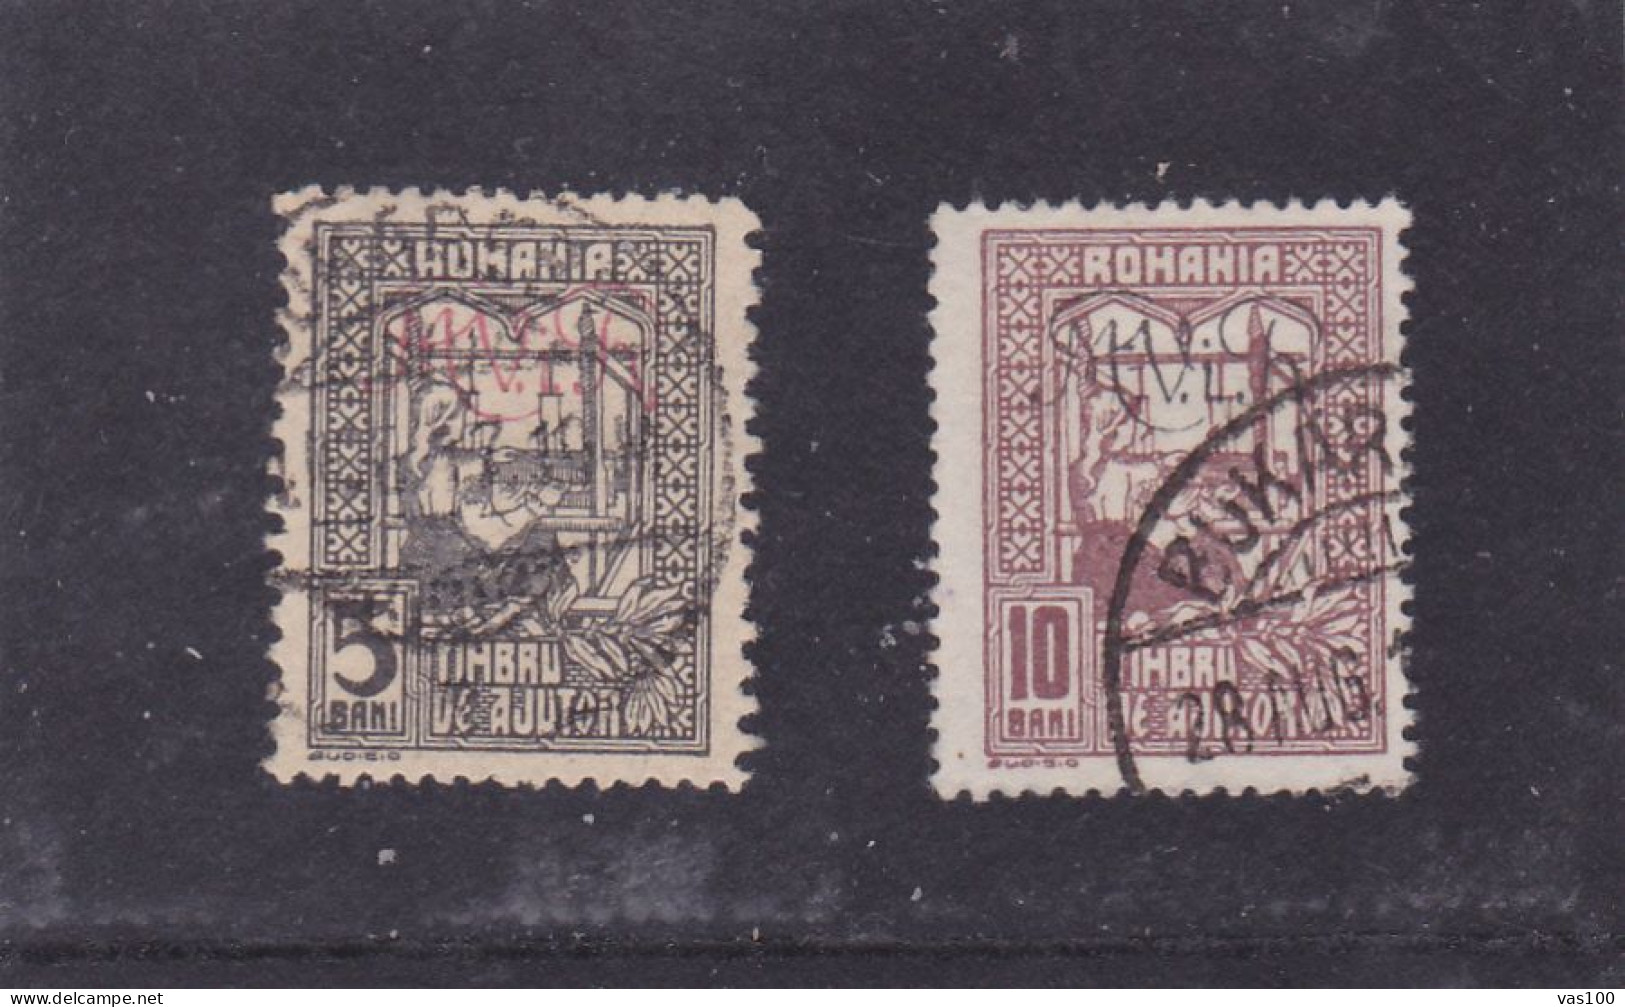 Germany WW1 Occupation In Romania 1917 MViR  2 STAMPS POSTAGE DUE USED - Bezetting